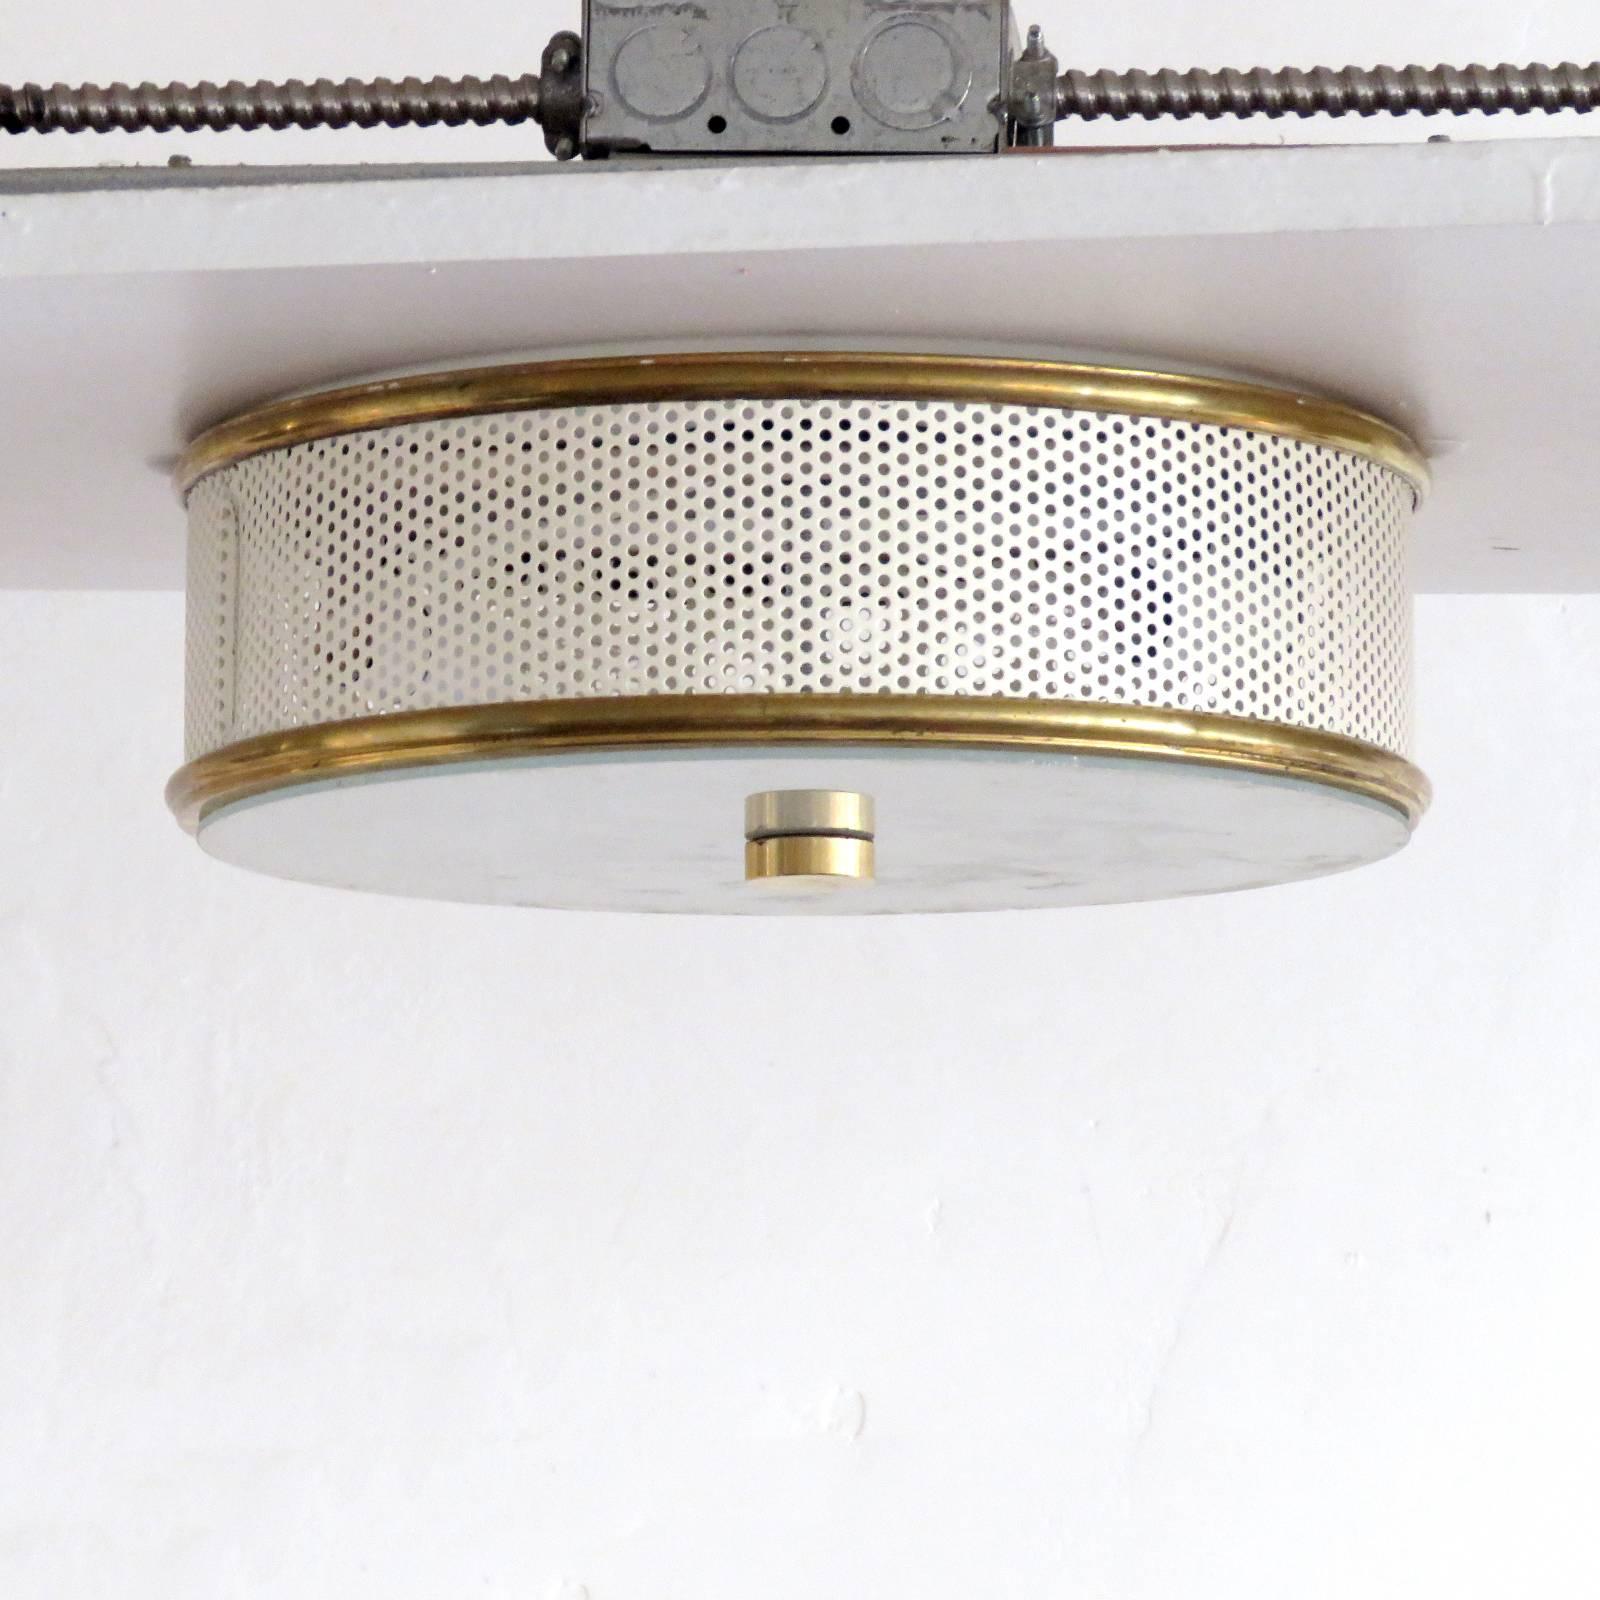 Elegant flush mount ceiling light attributed to Mathieu Mategot, perforated enameled metal ring with brass rims and sandblasted glass disc.